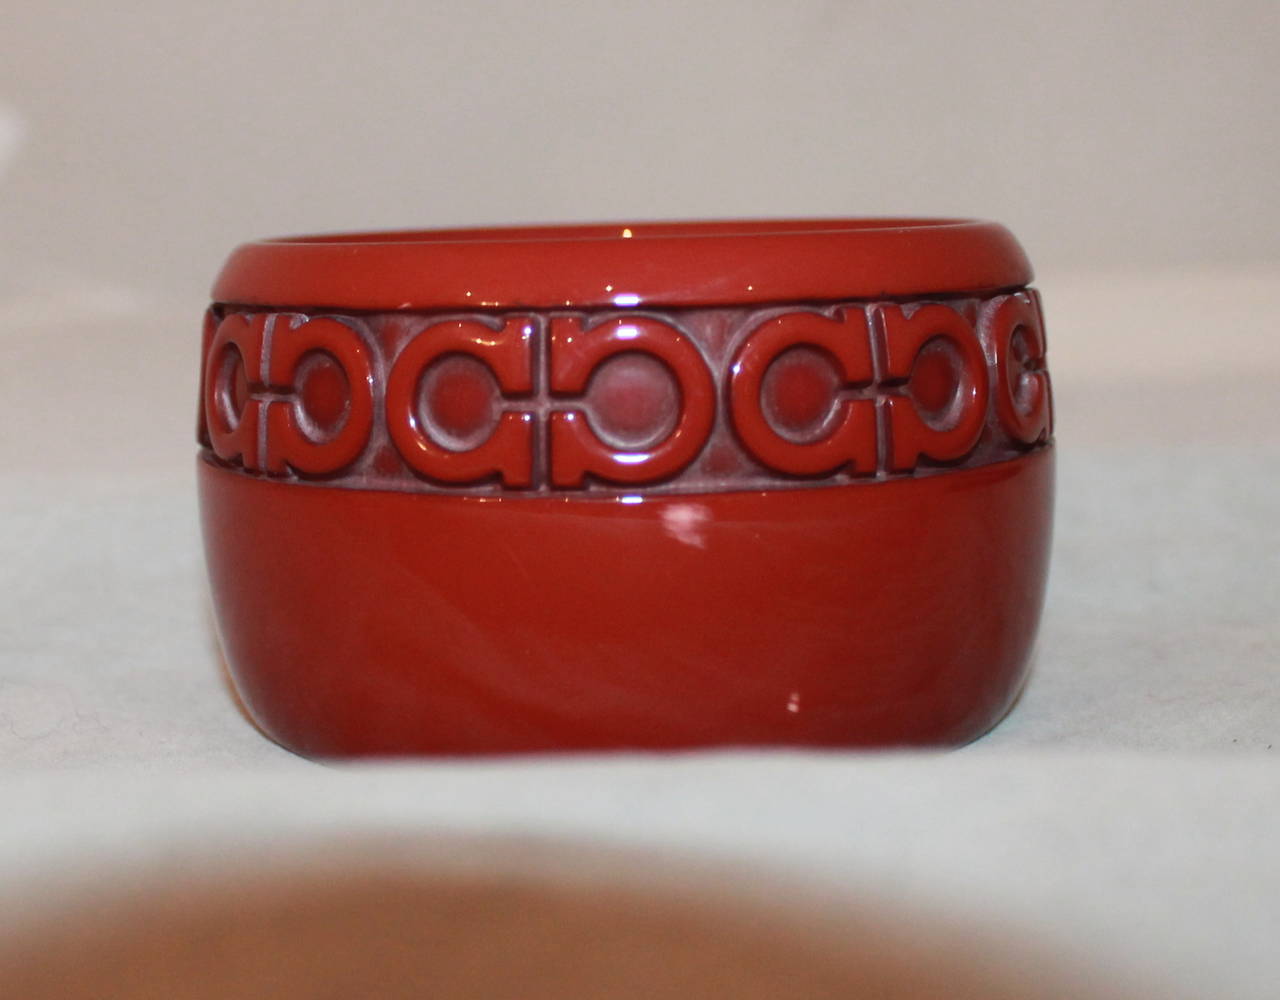 Salvatore Ferragamo Burnt Red Resin Cuff with Logo. This cuff is in excellent condition.

Length- 8